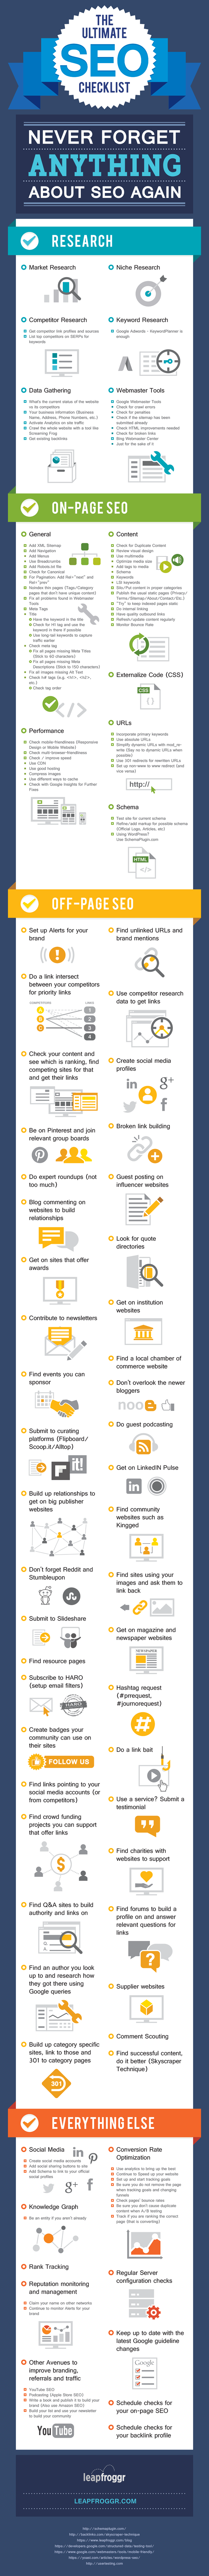 11 SEO tips to improve your site [Infograph]